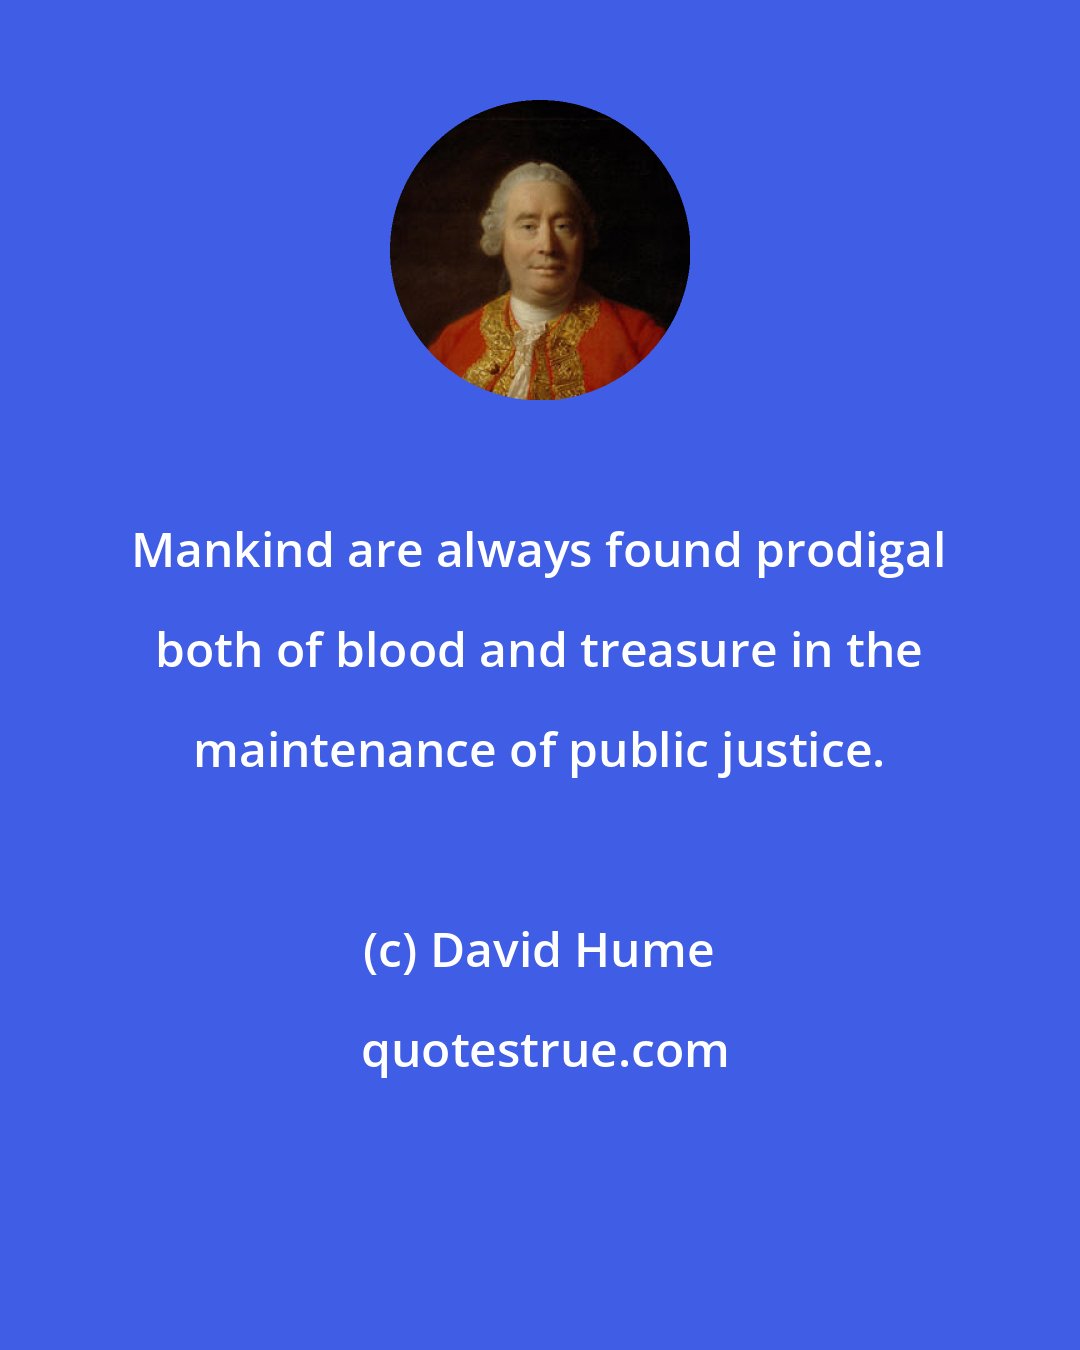 David Hume: Mankind are always found prodigal both of blood and treasure in the maintenance of public justice.